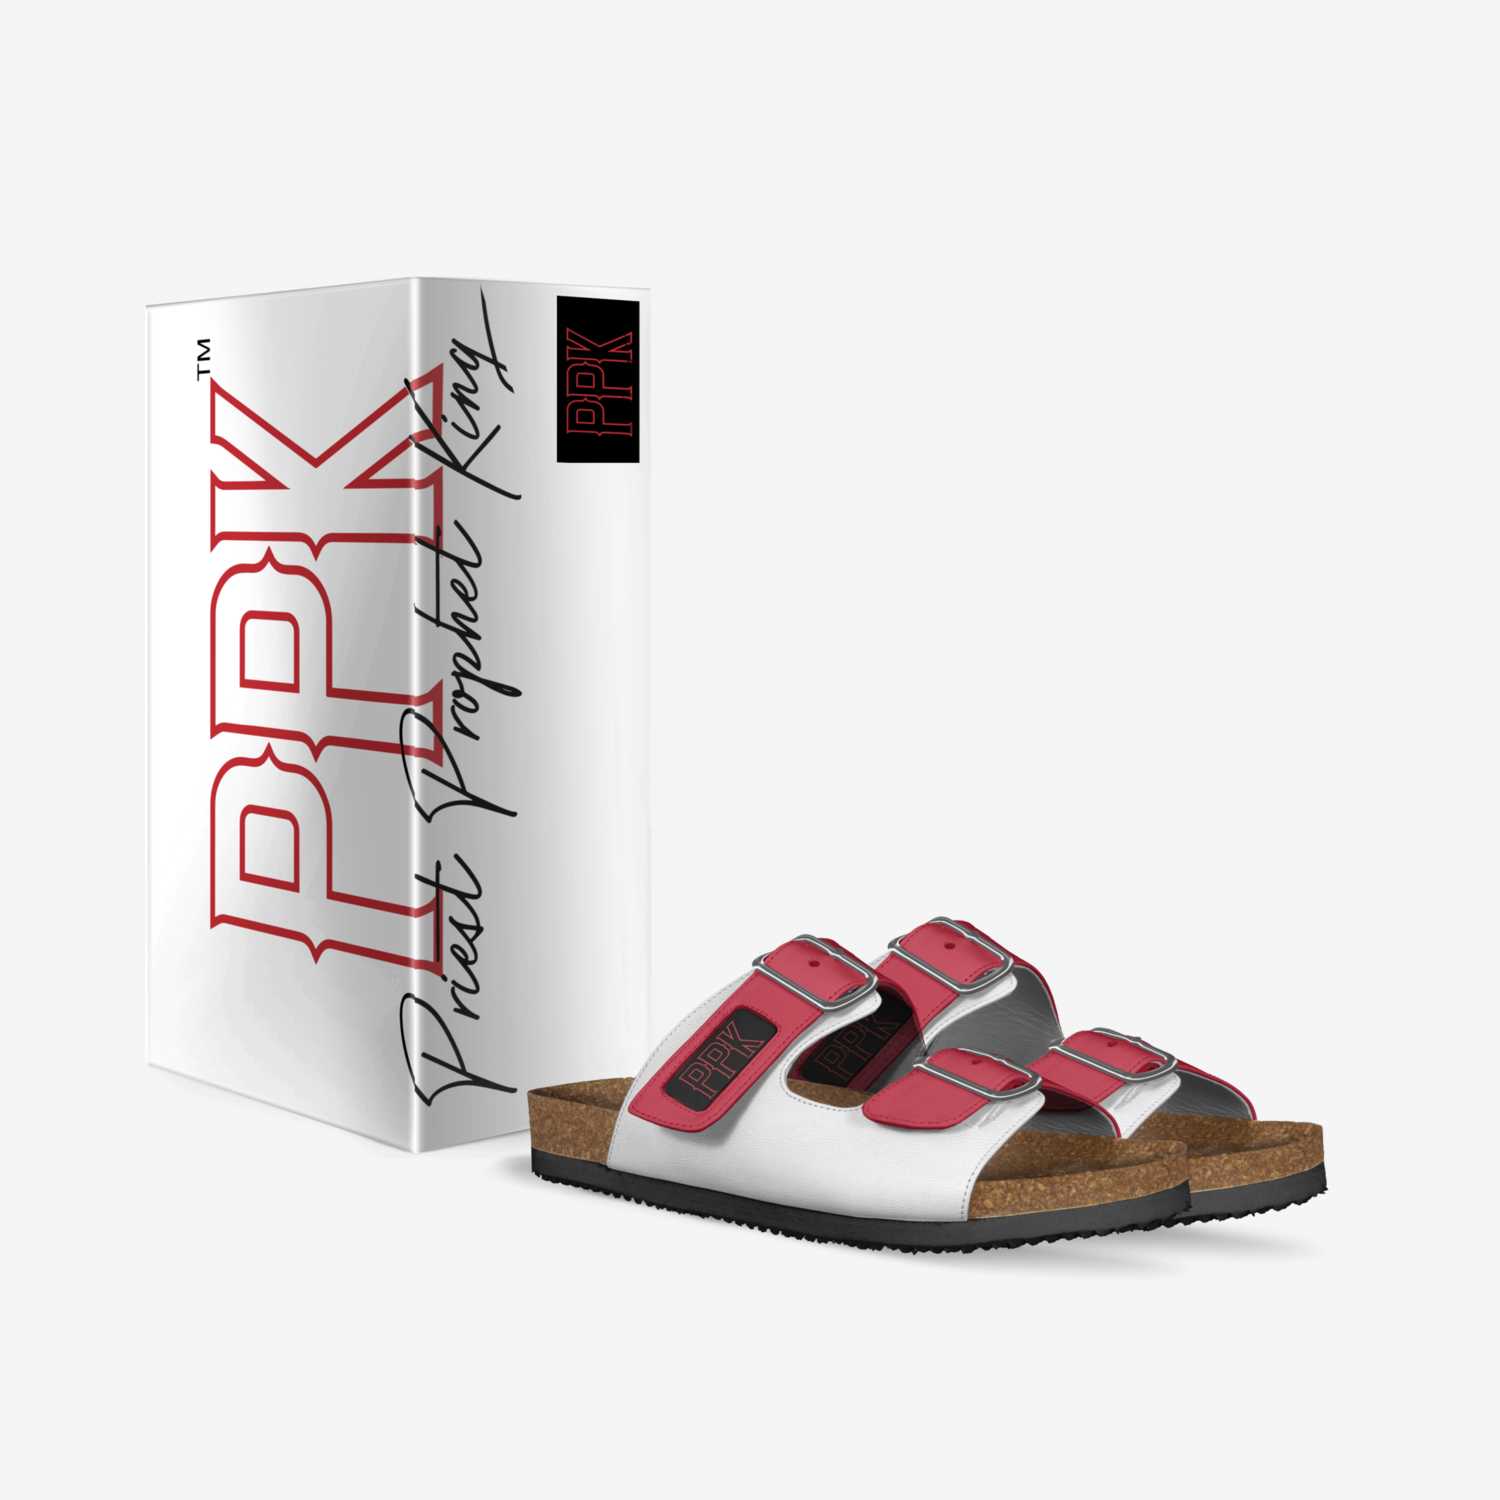 PPK Sandal custom made in Italy shoes by Gerald Benton | Box view